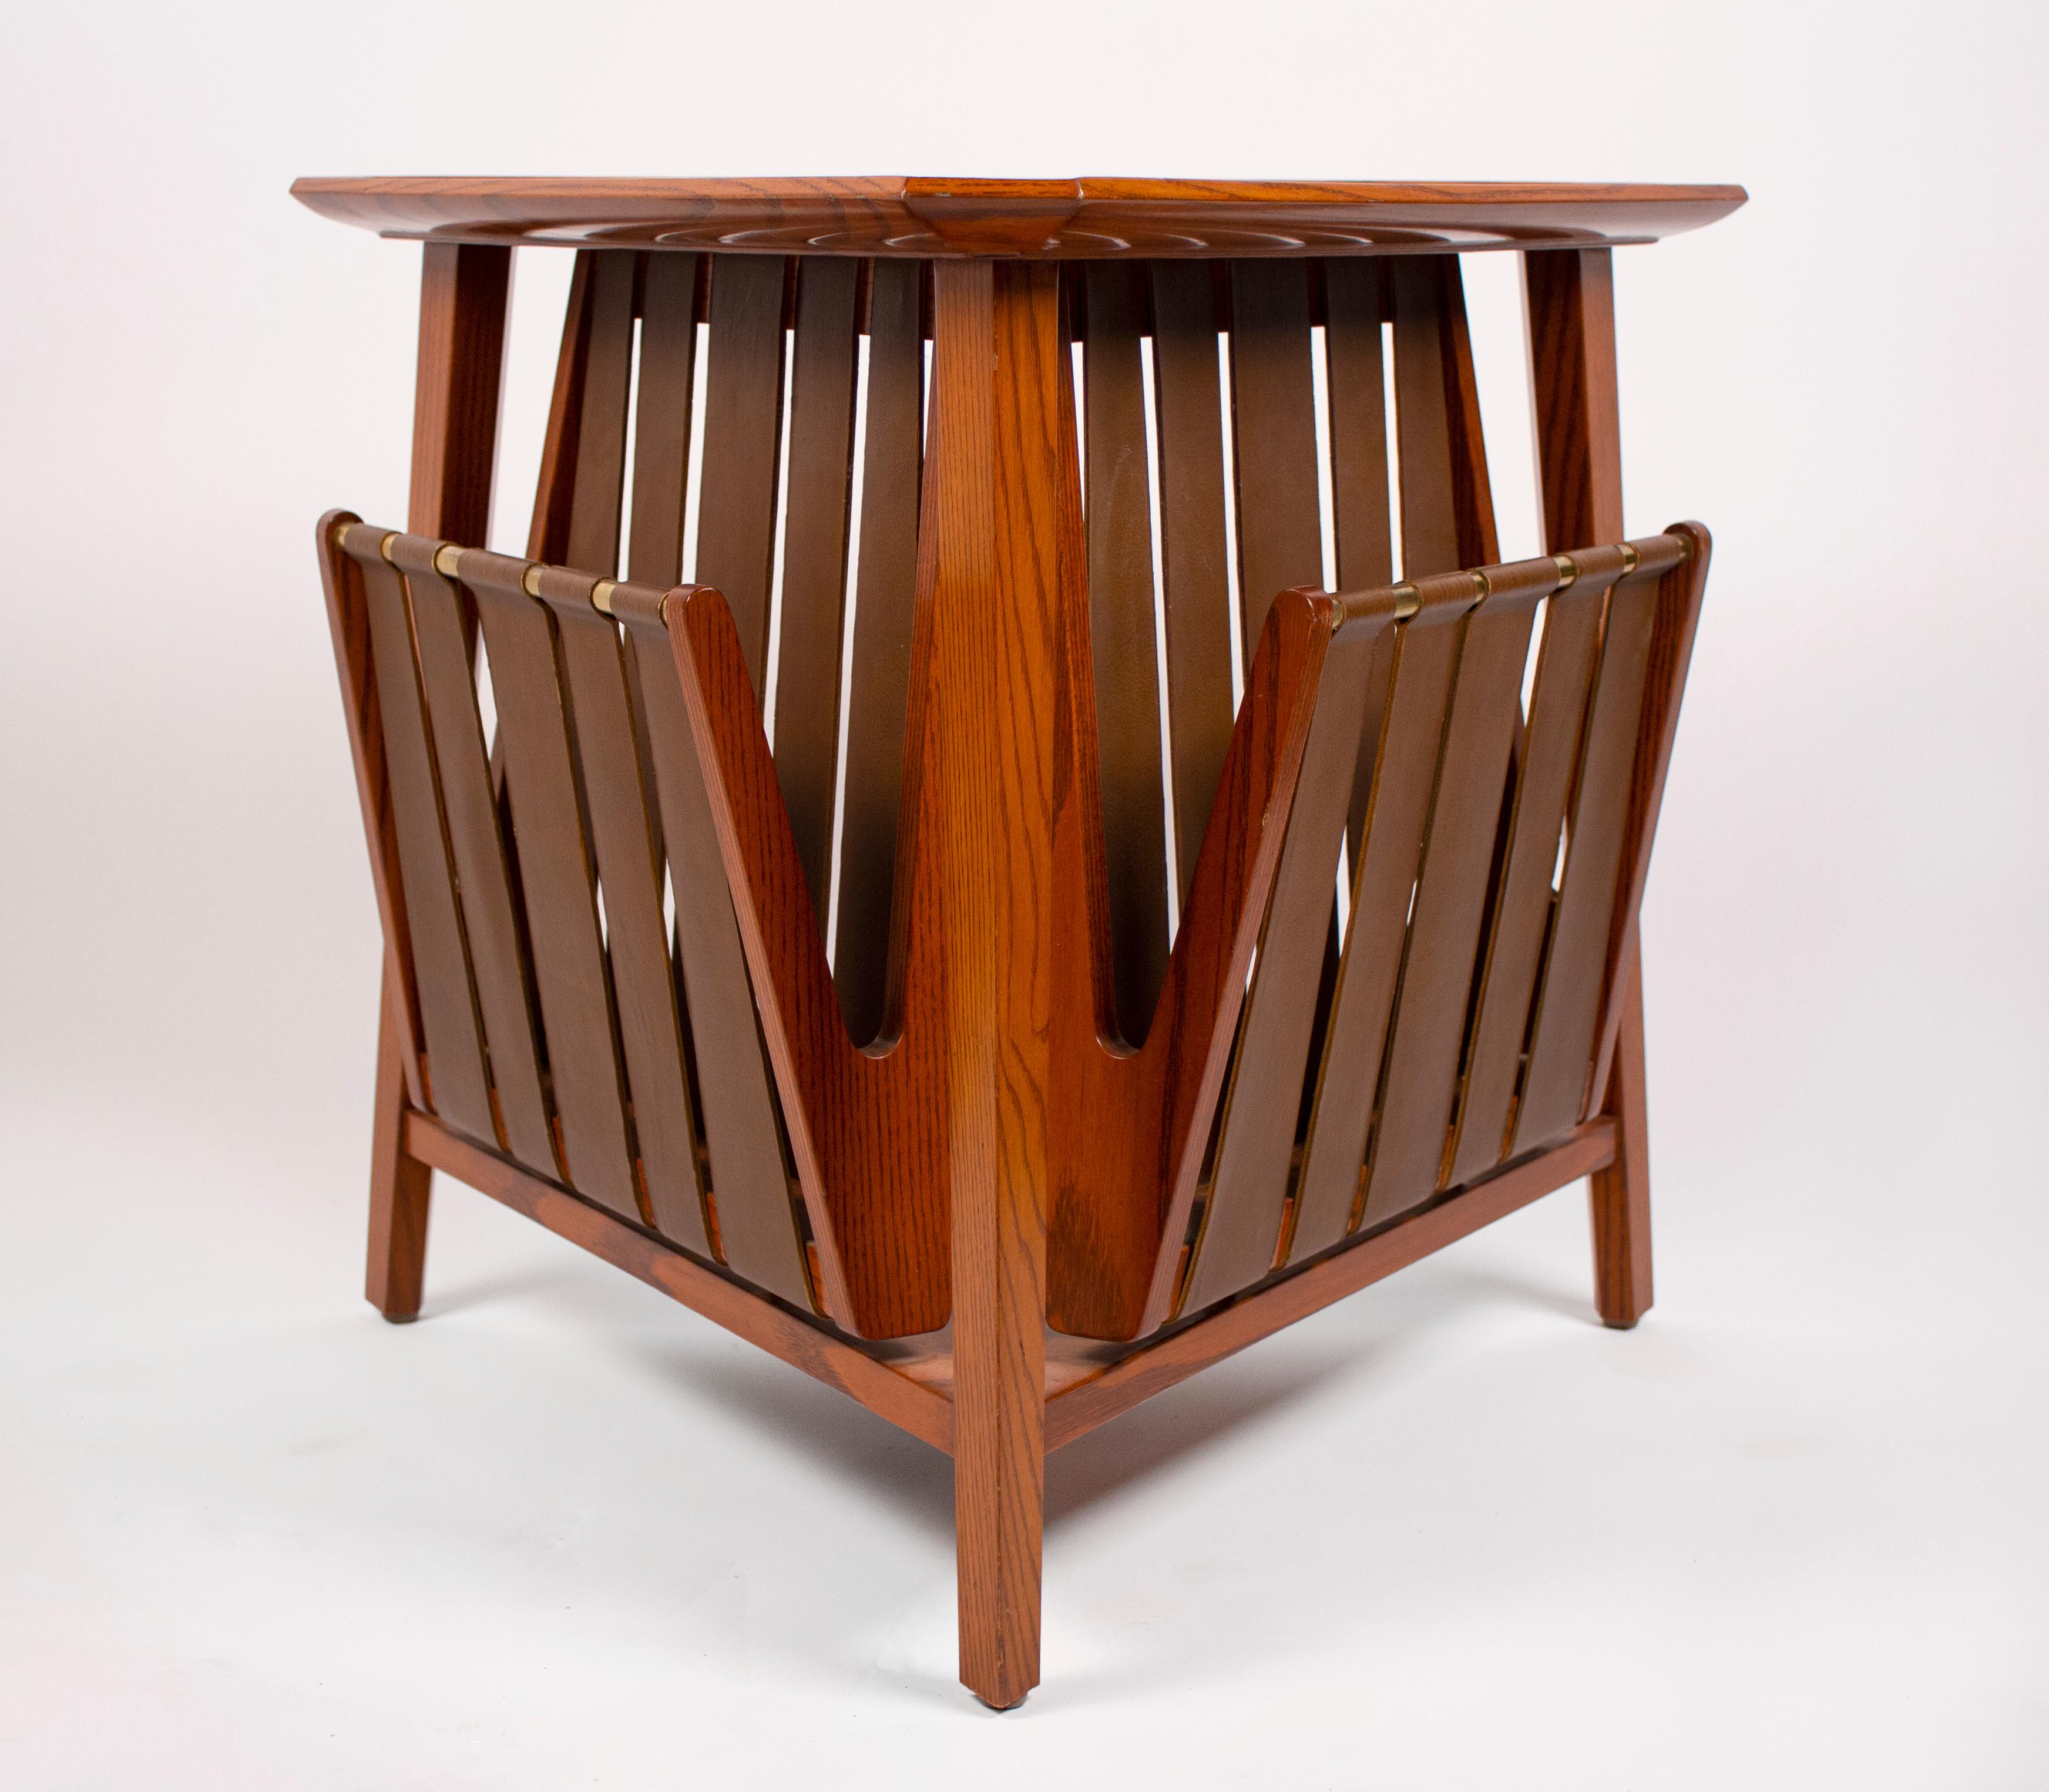 Magazine table by Edward Wormley for Dunbar, 1959. Table constructed of oak, brass and leather, very good original condition.